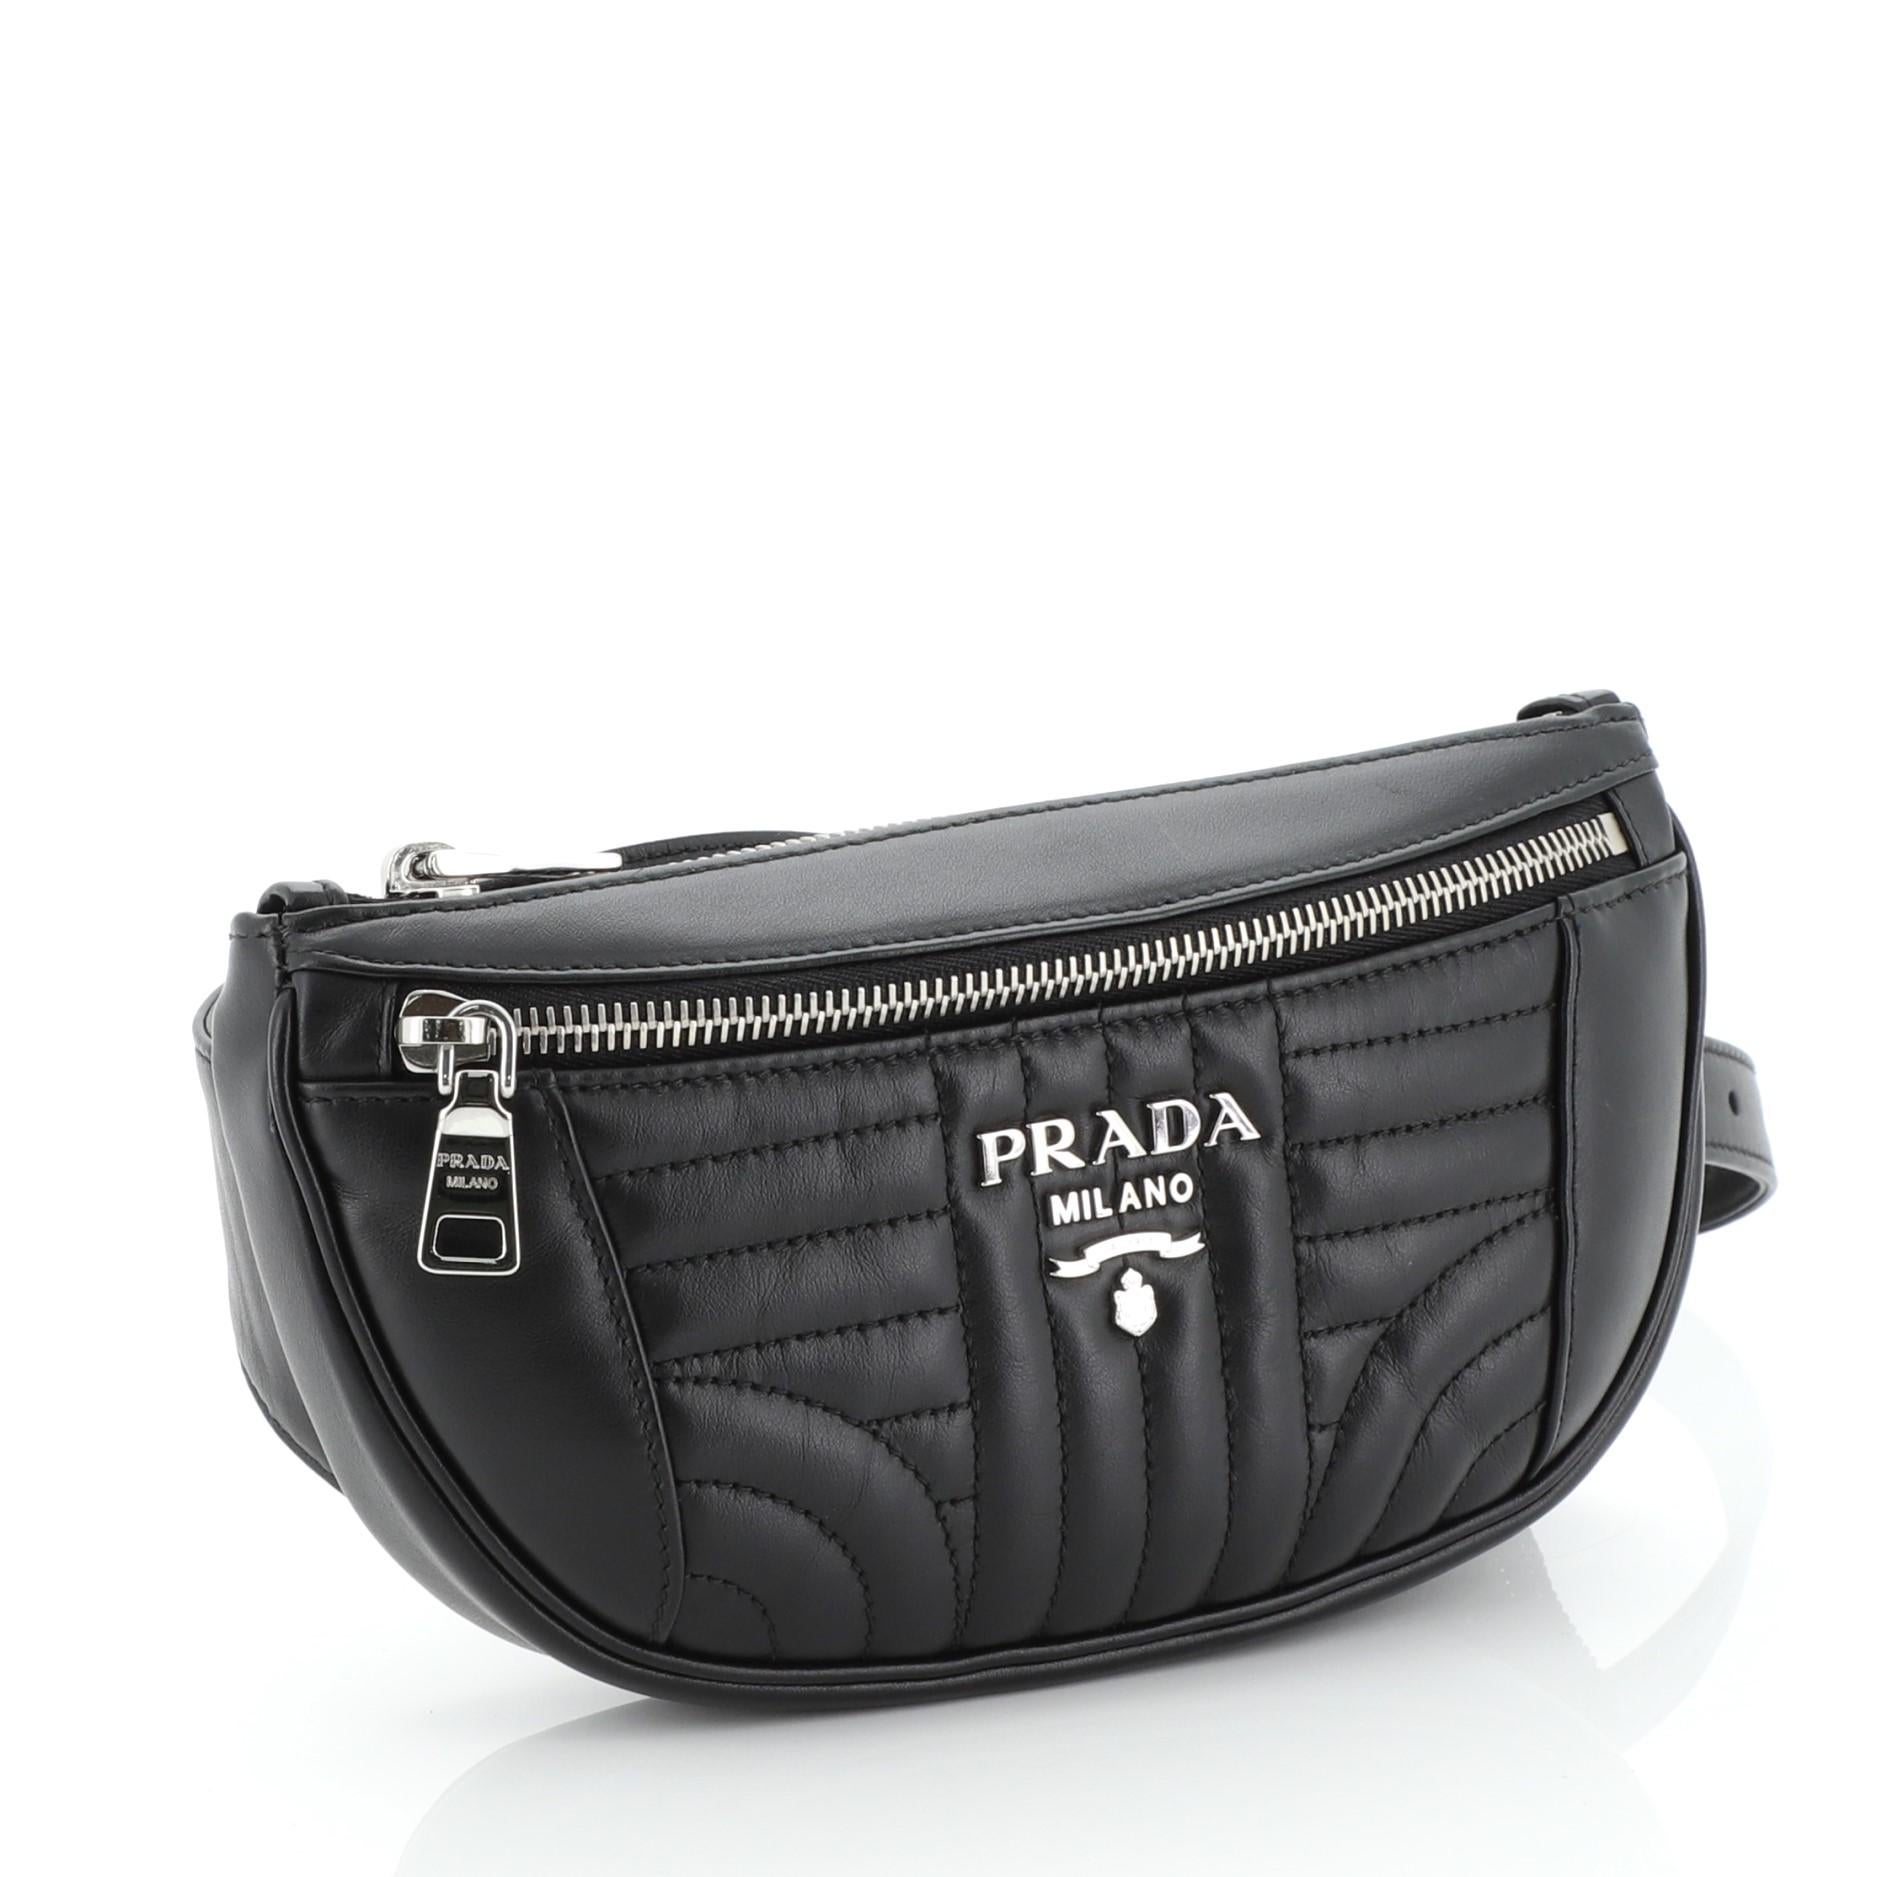 This Prada Belt Bag Diagramme Quilted Leather Small, crafted in black diagramme quilted leather, features an adjustable belt strap, exterior zip pocket and silver-tone hardware. Its zip closure opens to a black fabric interior. 

Estimated Retail